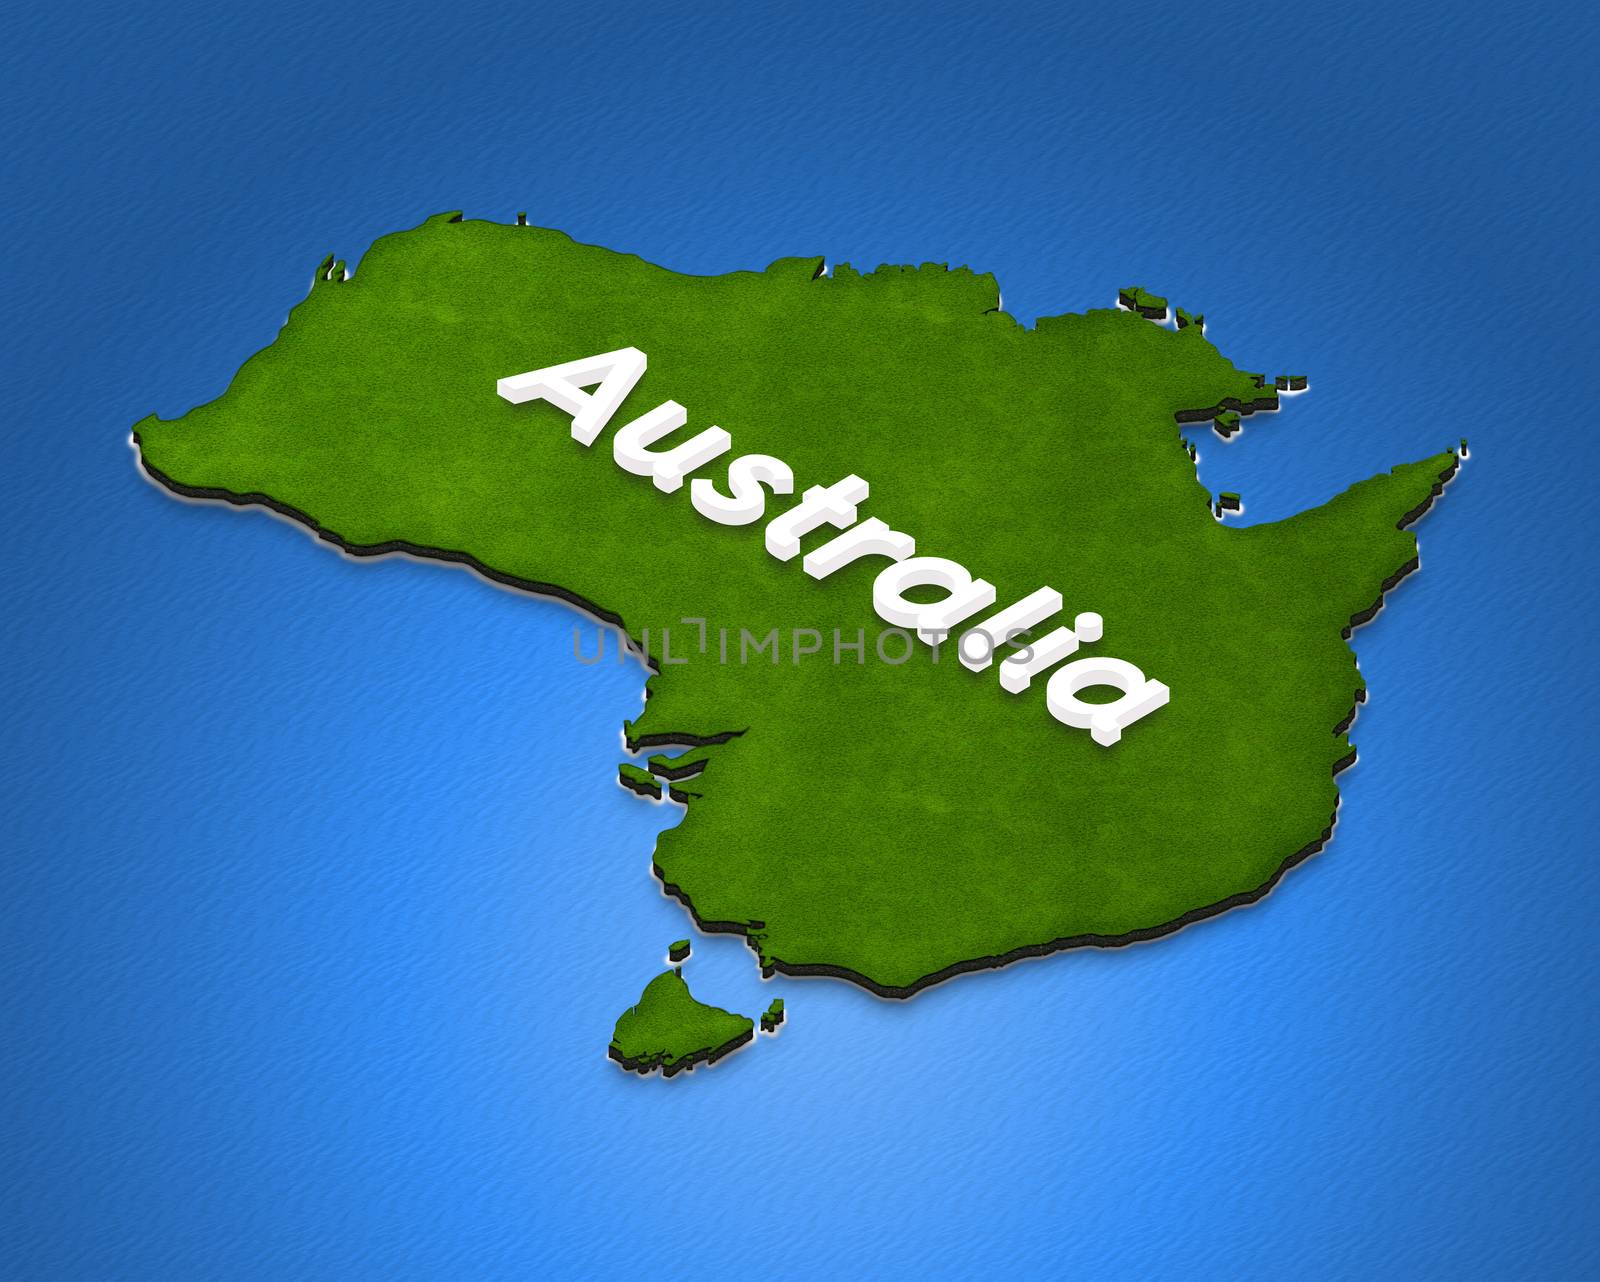 Illustration green ground map of Australia on water background. Left 3D isometric projection with the name of continent.